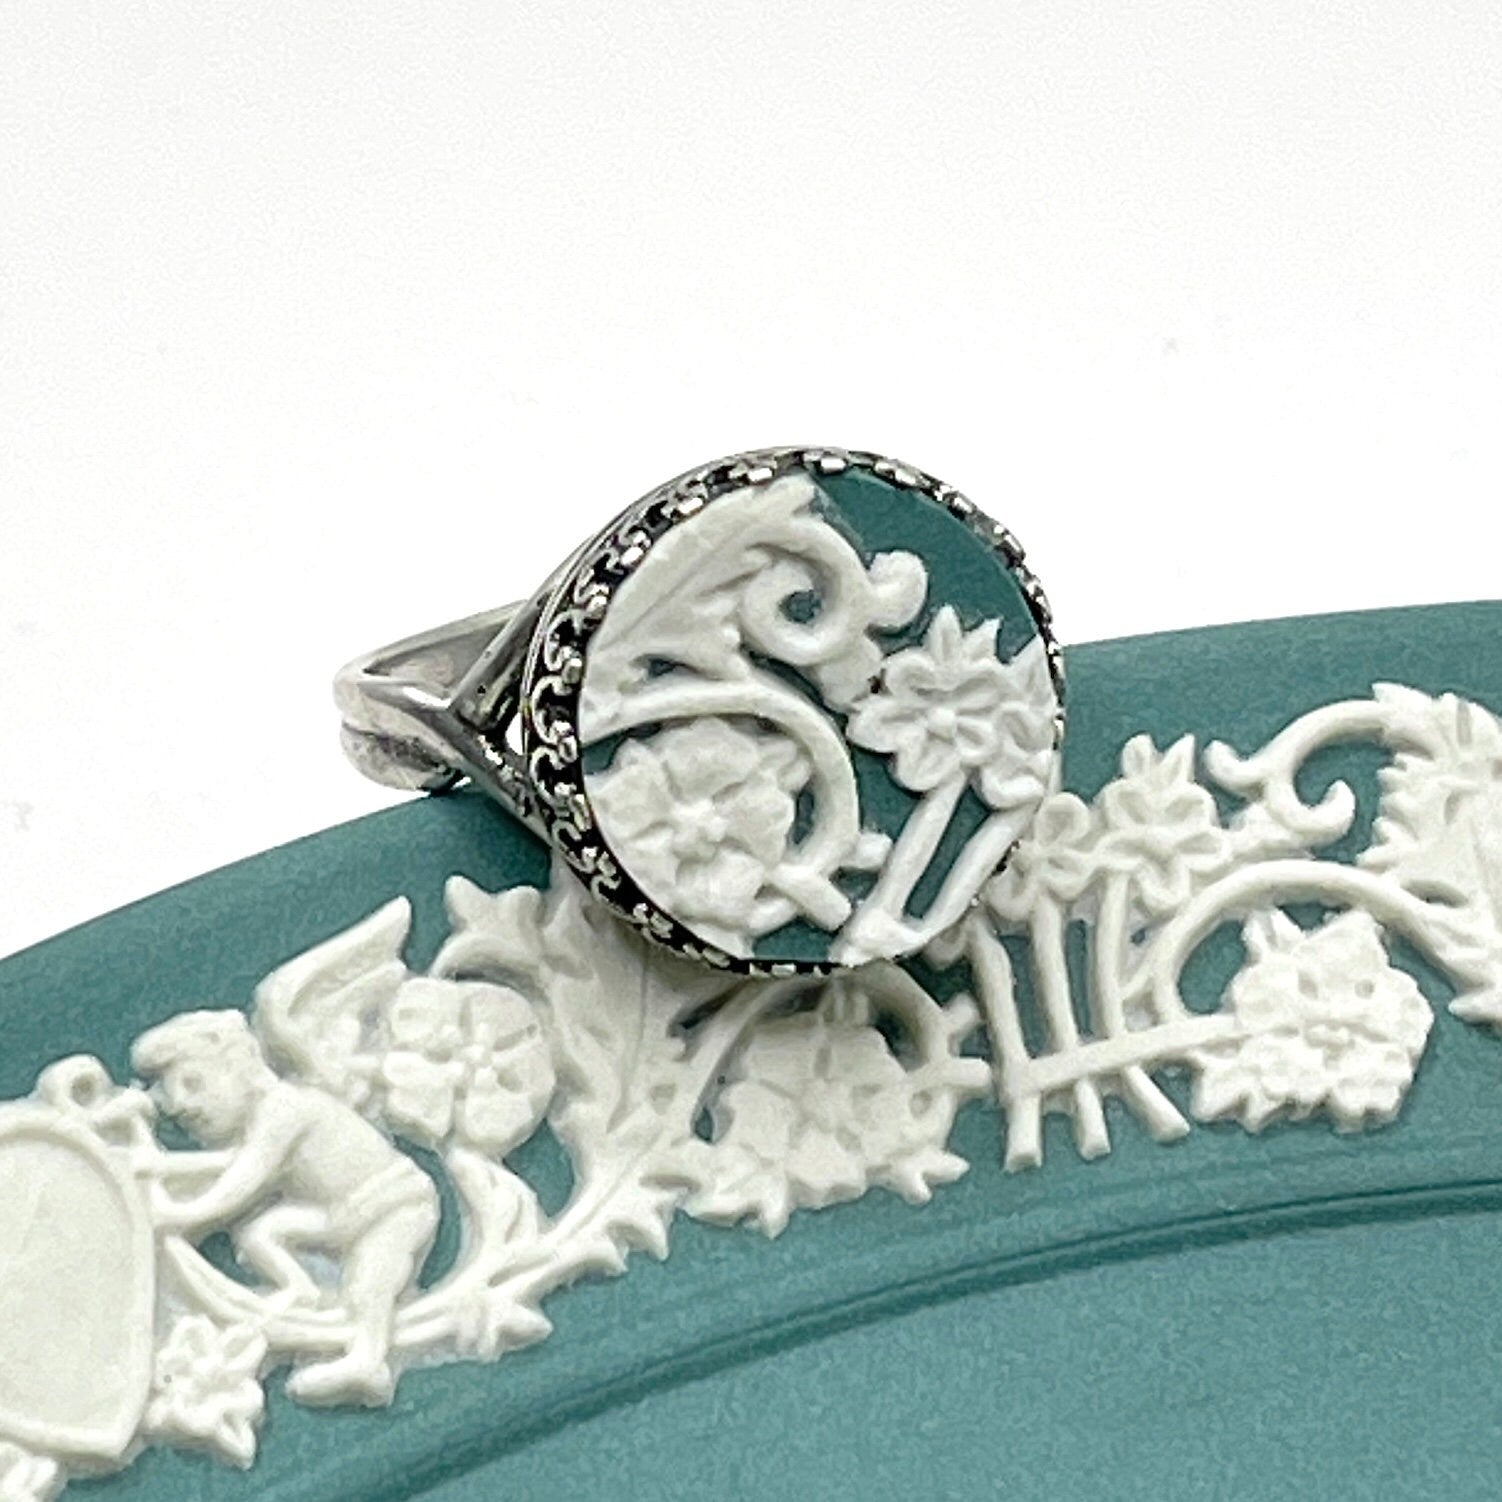 Vintage Wedgwood Ring, Broken China Jewelry, Teal Jasperware, Victorian Jewelry, Unique Gifts for Women